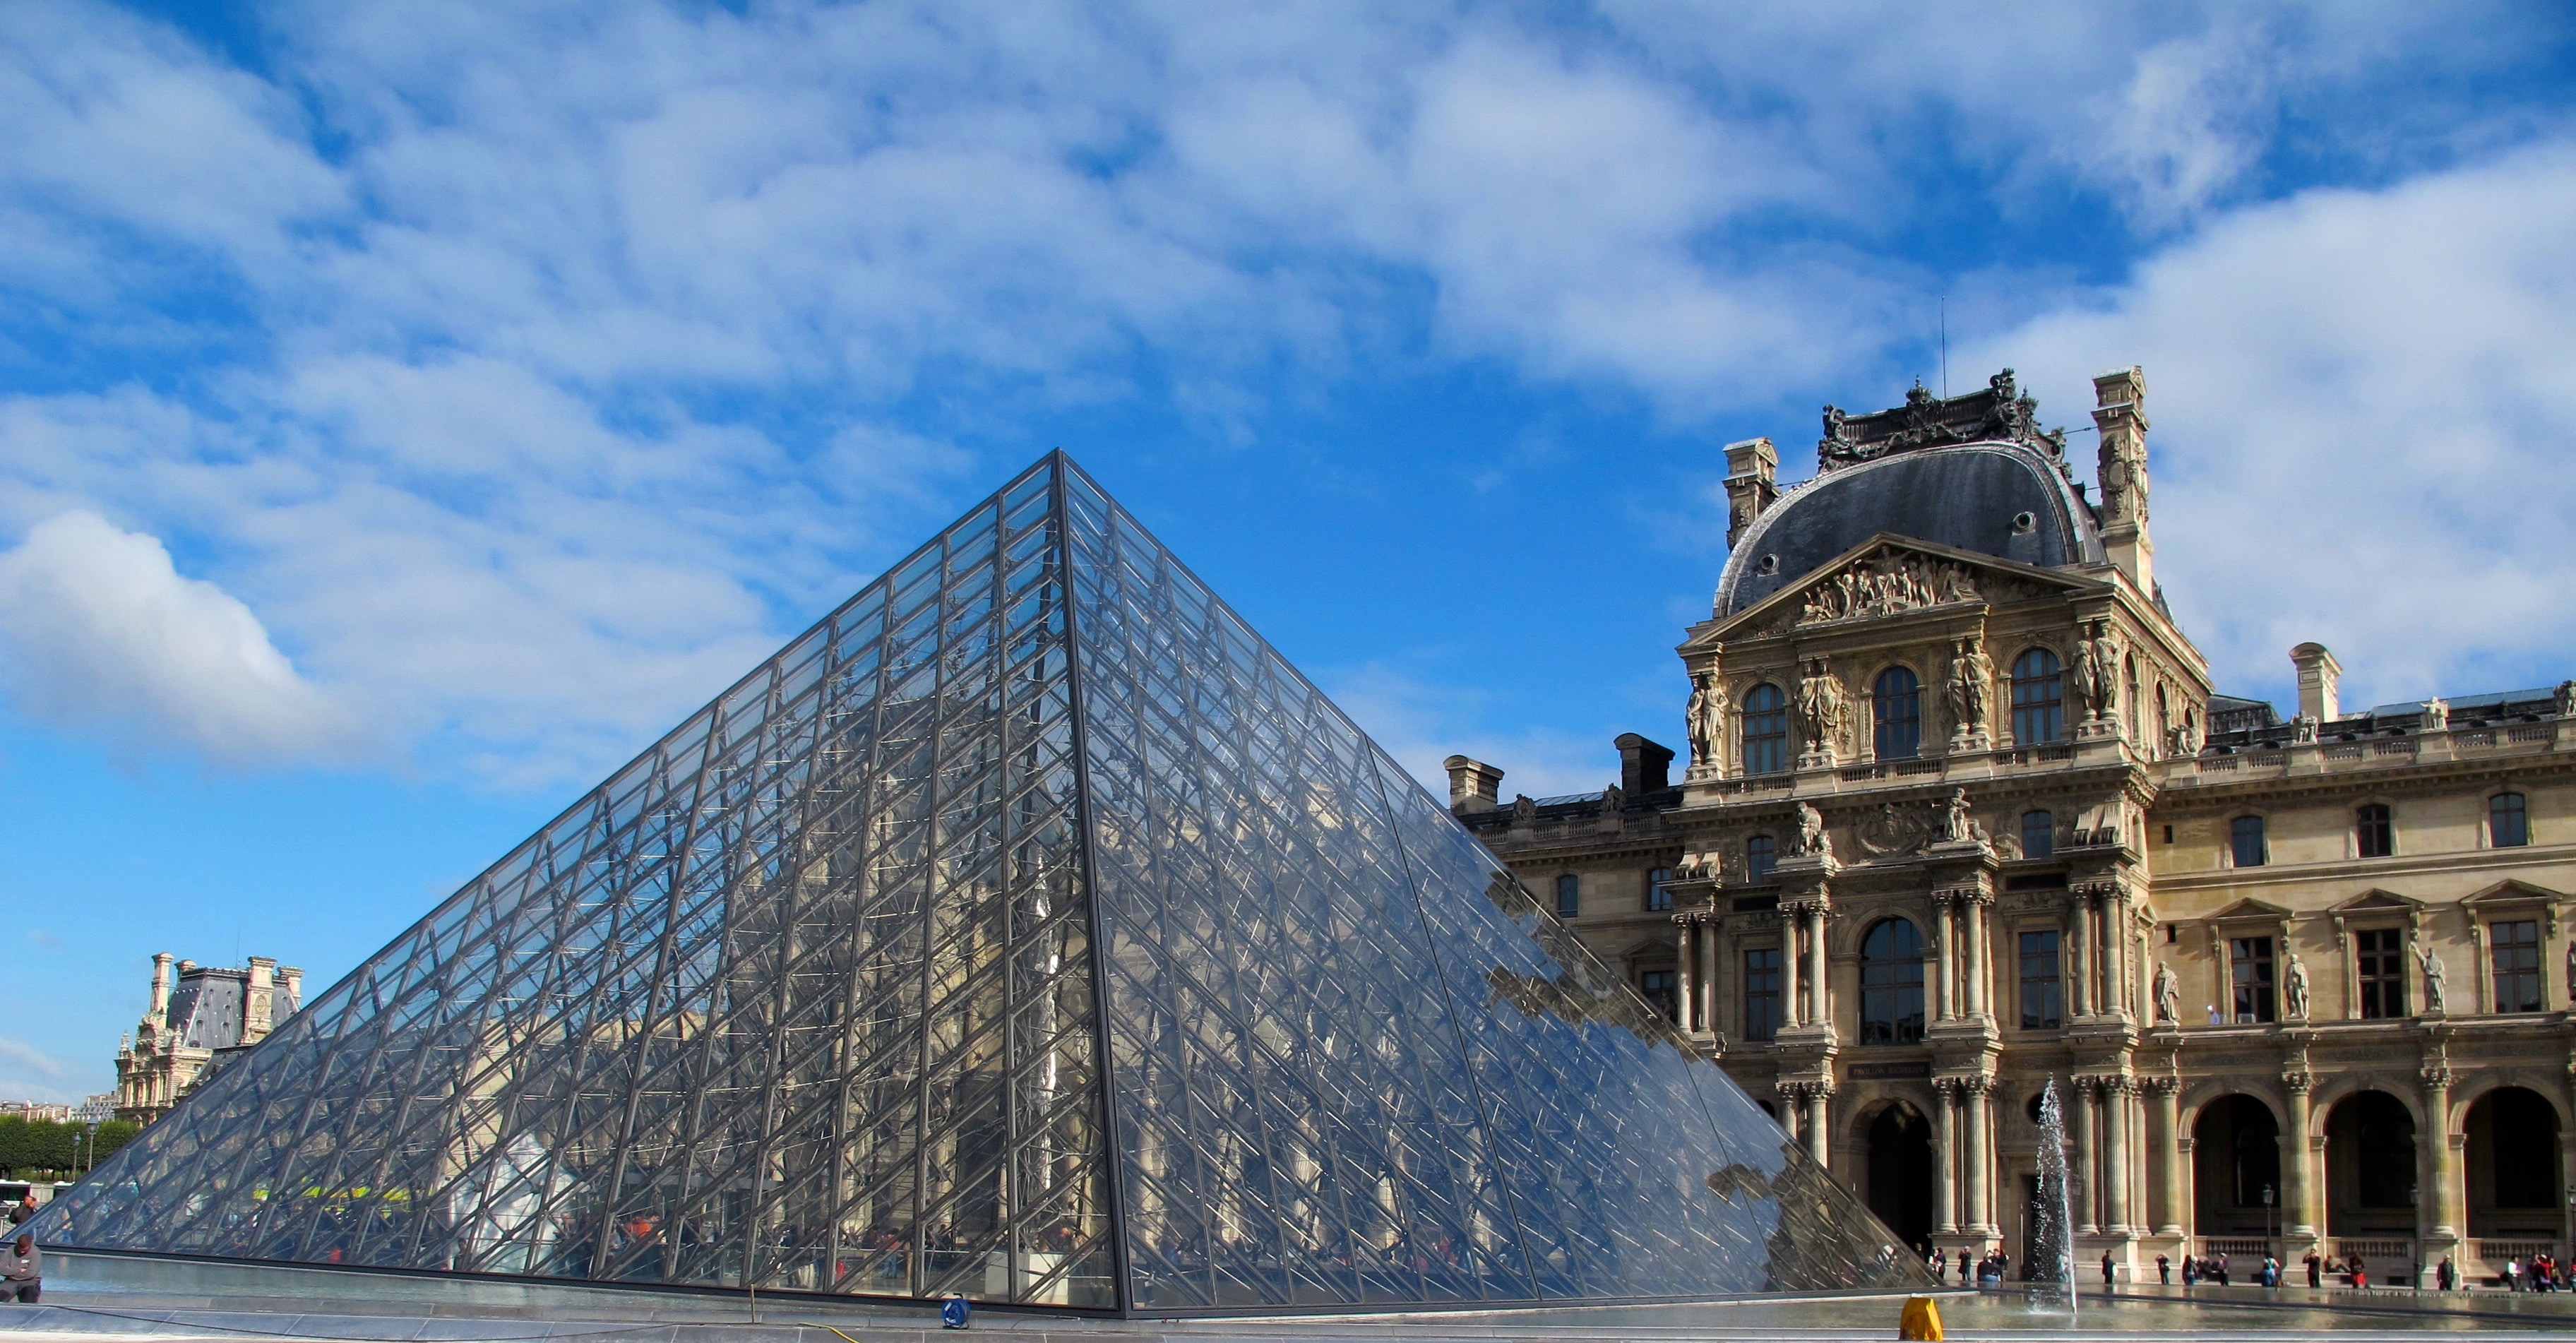 I.M. Pei glass pyramid and Louvre"You can’t escape the past in Paris, and yet what’s so wonderful about it is that the past and present intermingle so intangibly that it doesn’t seem to burden." Allen Ginsberg